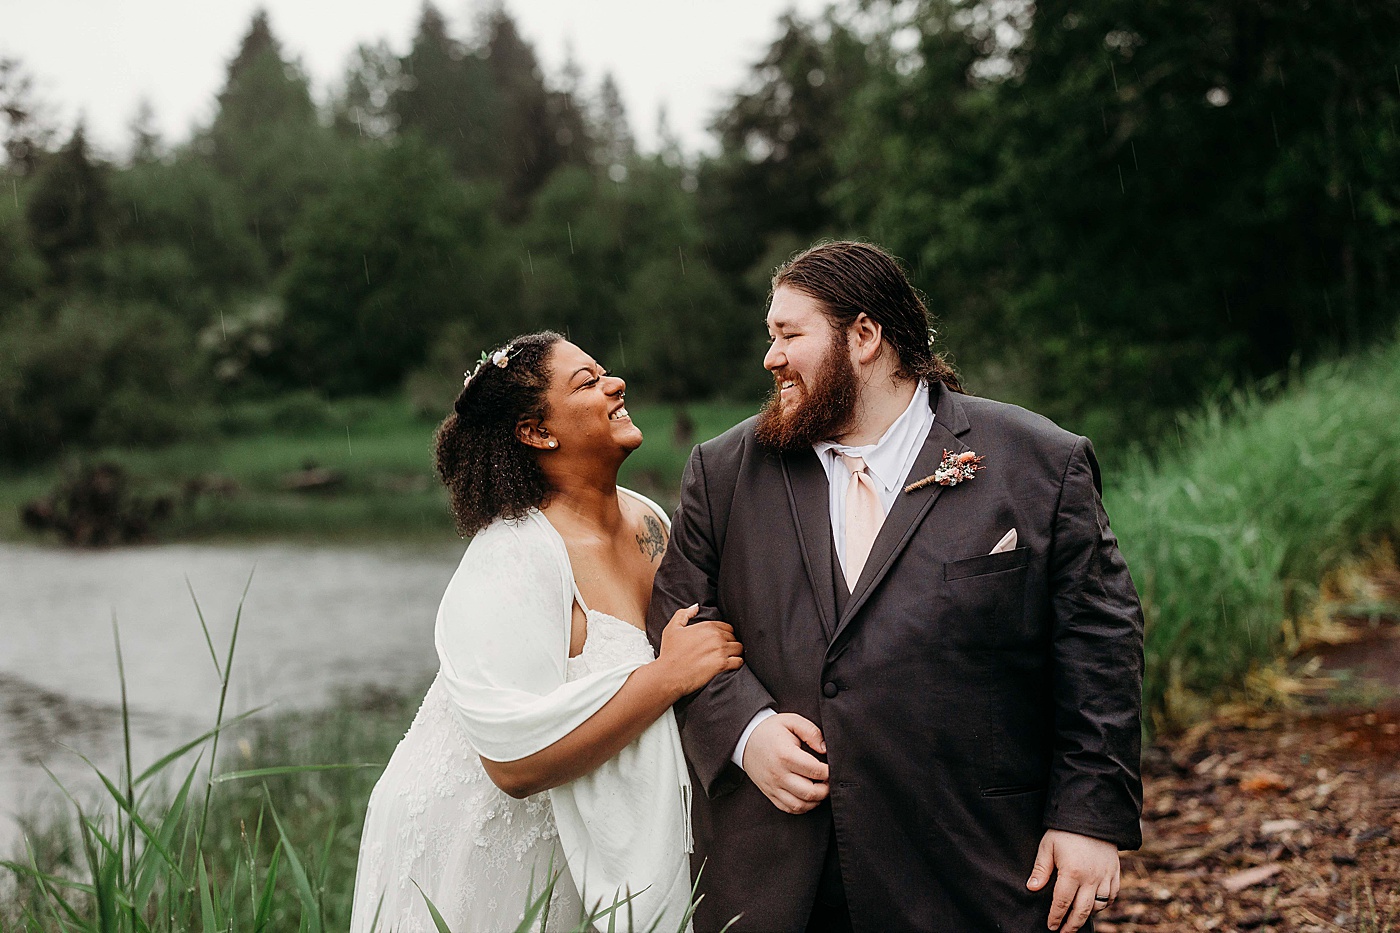 Bride and groom smiling at each other | Photo by Megan Montalvo Photography